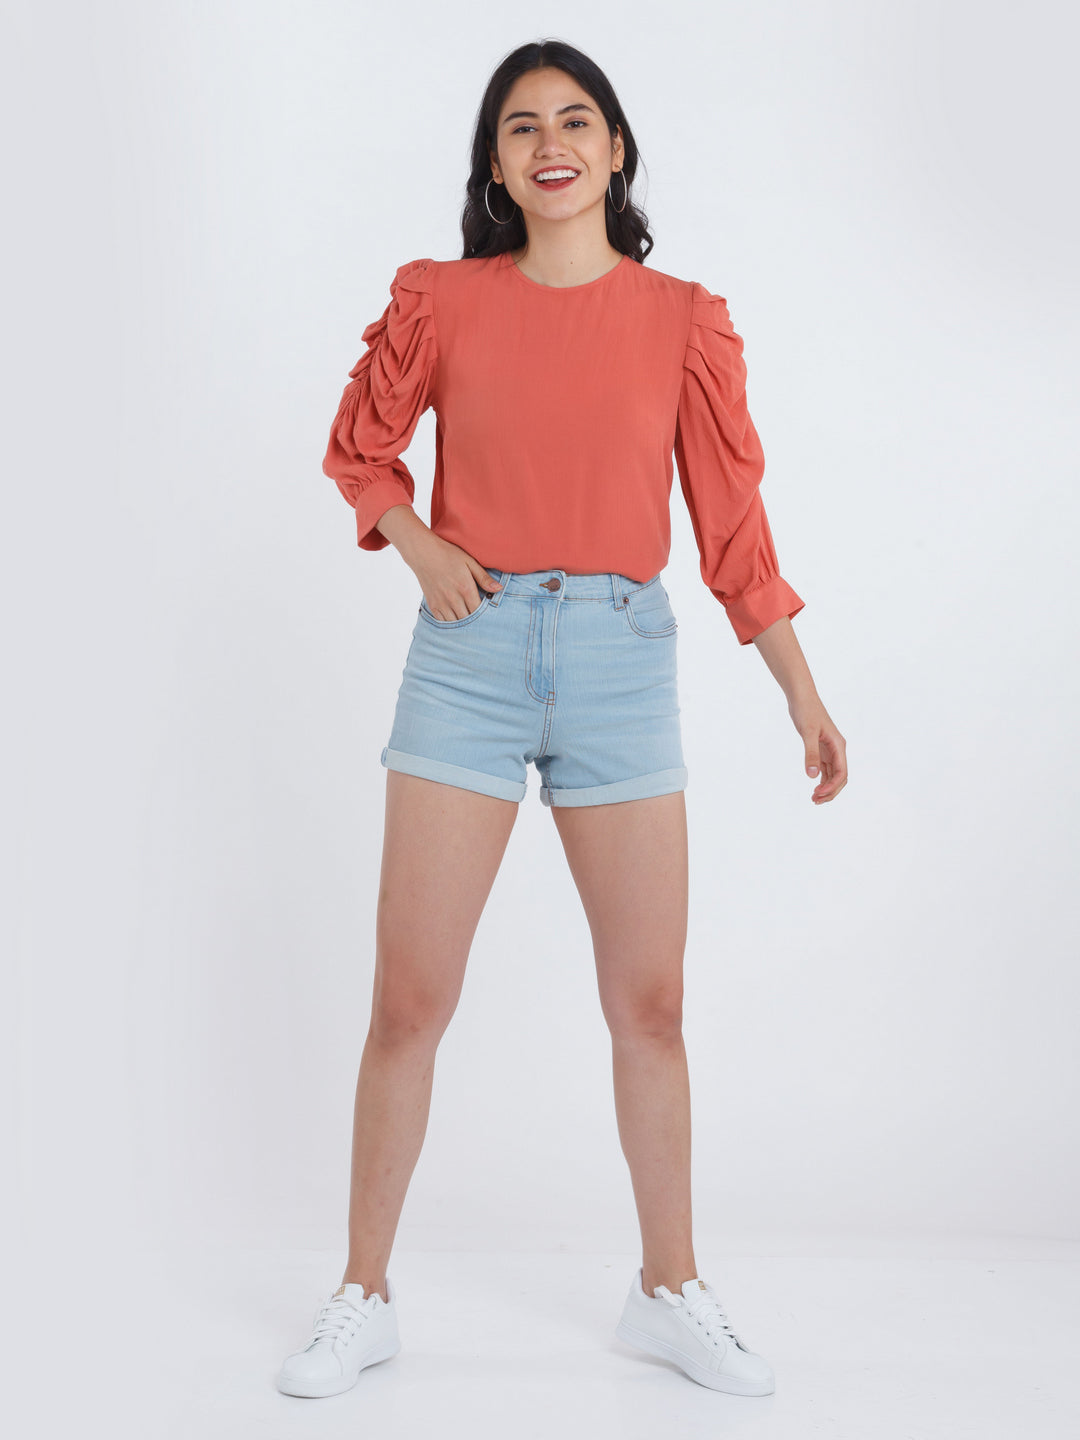 Blue Solid Jeans Shorts For Women